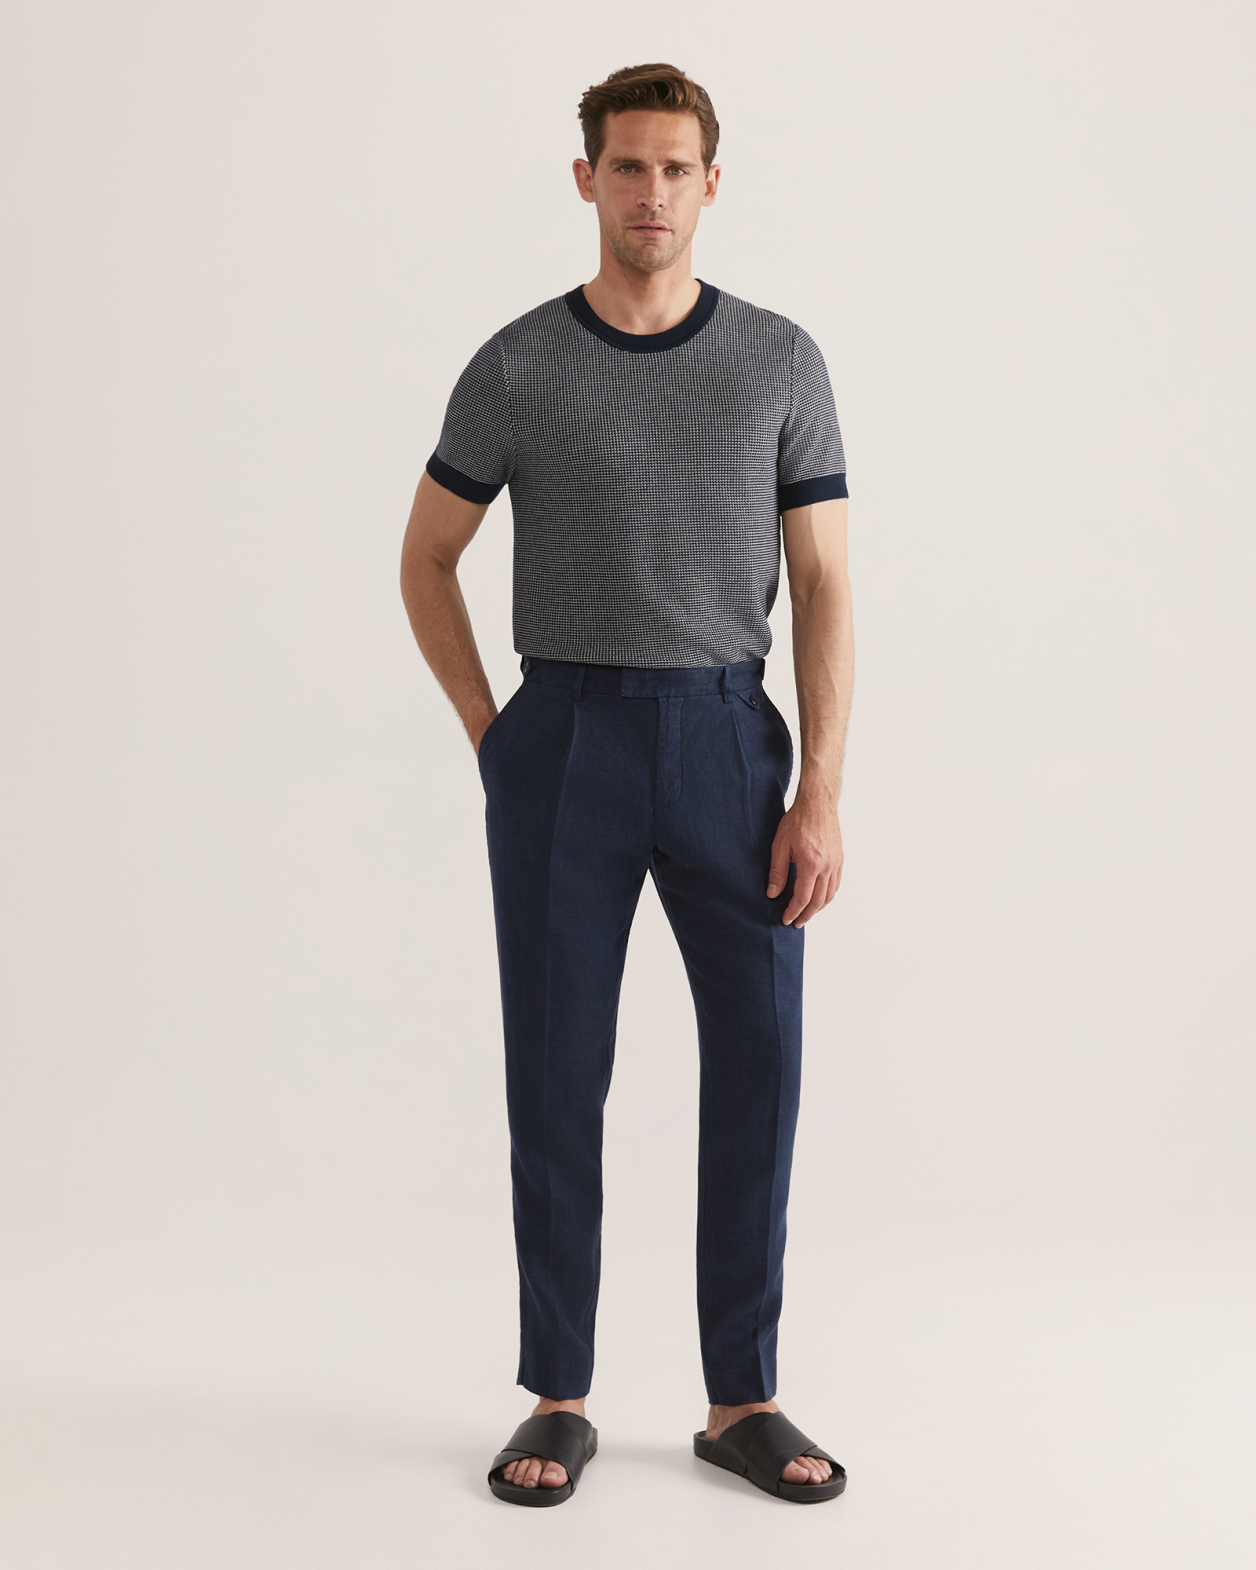 Wade Pleat Front Pant in NAVY